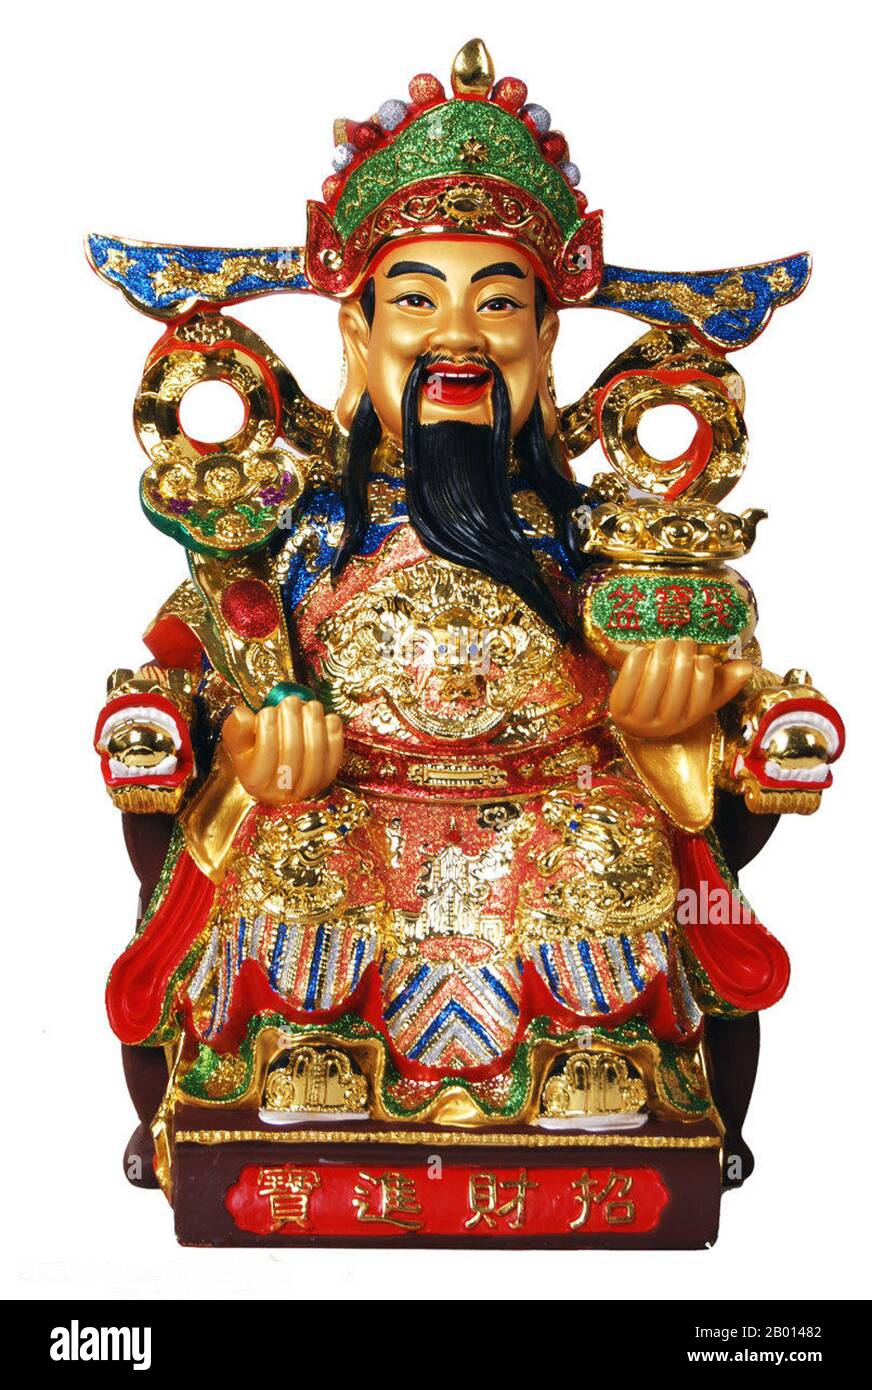 China: Cai Shen (Wade–Giles: Tsai Shen; Cantonese: Choy Sun, Hakka: Choy Sin) is the Chinese God of Wealth or Prosperity.  Cai Shen can also be referred to as Zhao Gongming (Chao Kung-ming) or Bi Gan (Pi-kan). Though Cai Shen began as a Chinese folk hero, later deified and venerated by local followers and admirers, Taoism and Pure Land Buddhism also came to venerate him as a god. Cai Shen's name is often invoked during the Chinese New Year celebrations. He is often depicted riding a black tiger and holding a golden rod. Stock Photo